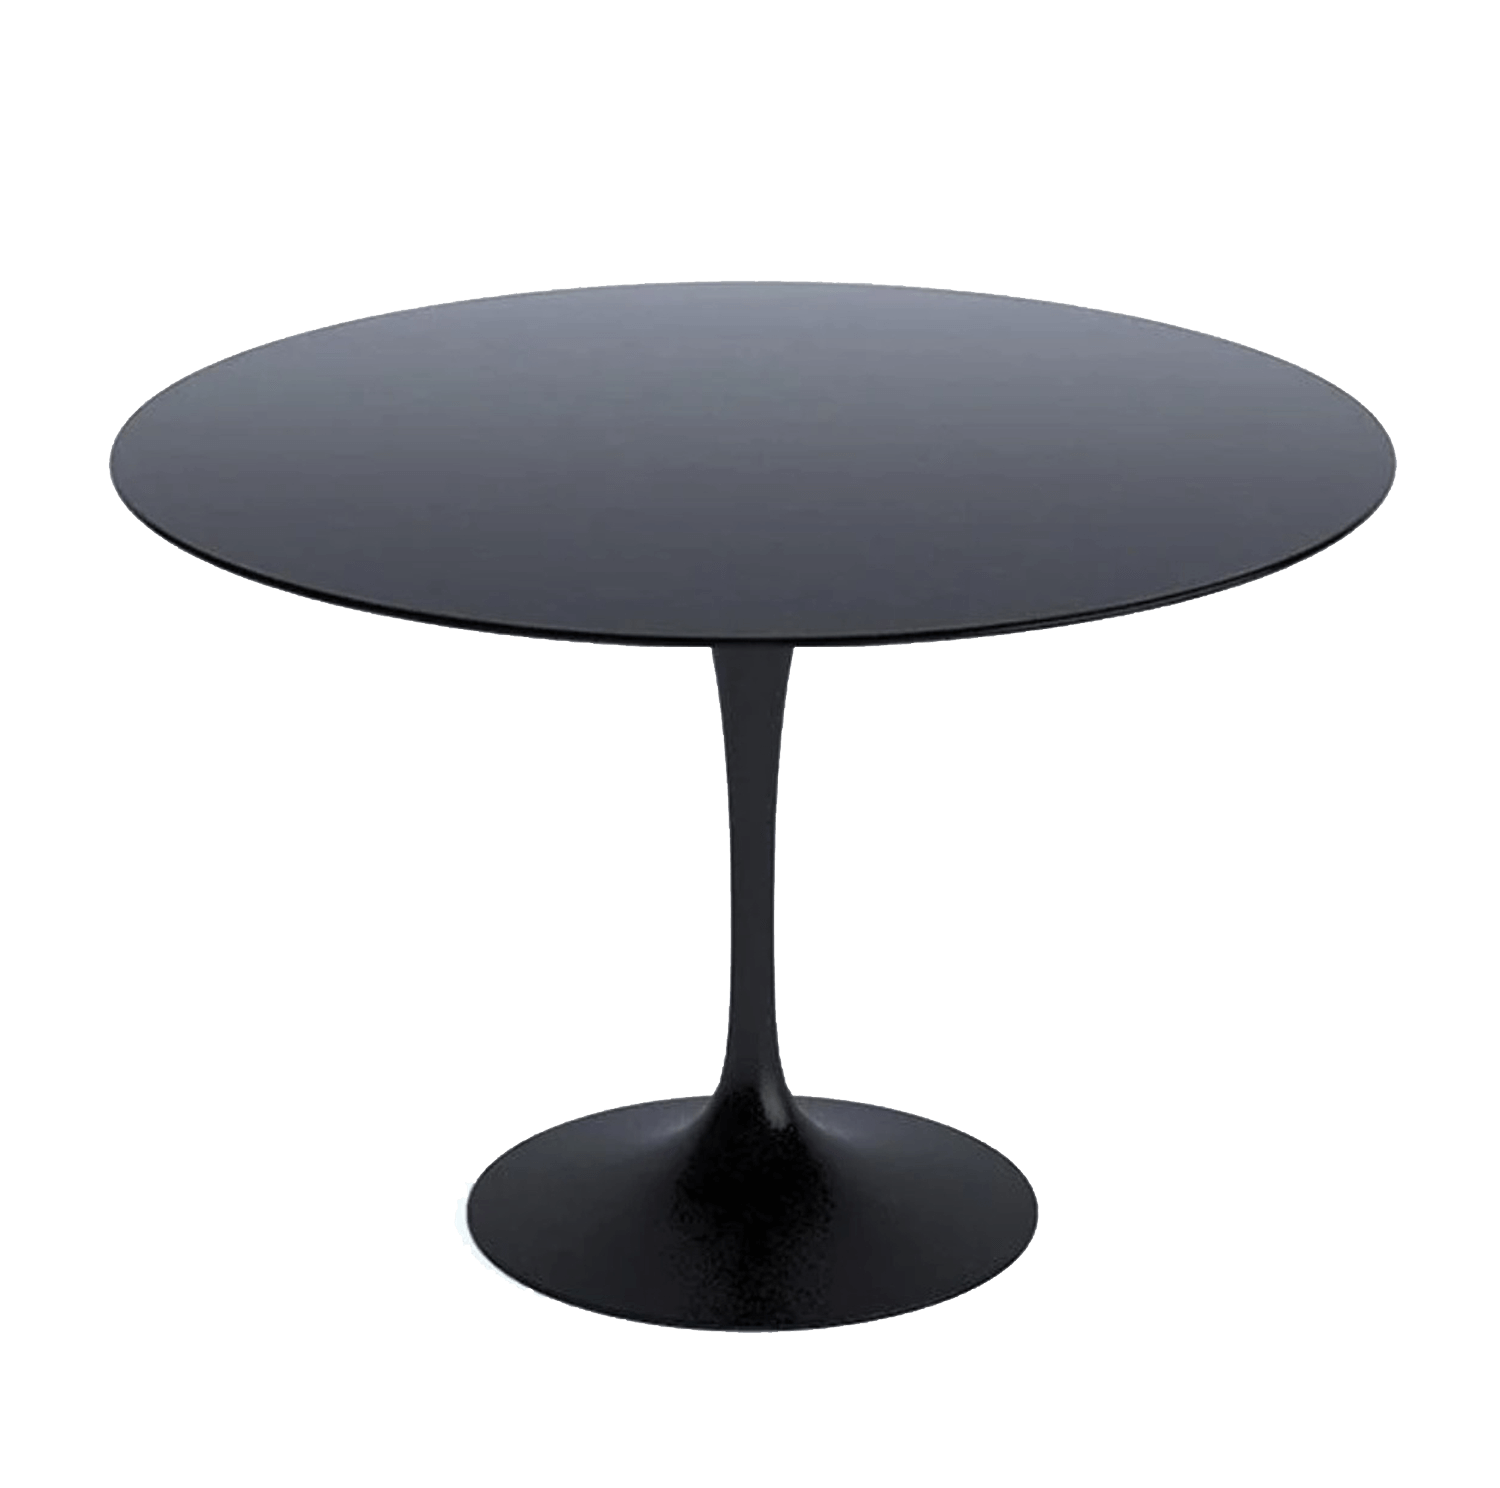 Once-Upon-a-Time-in-Miami-Black-Tulip-Table